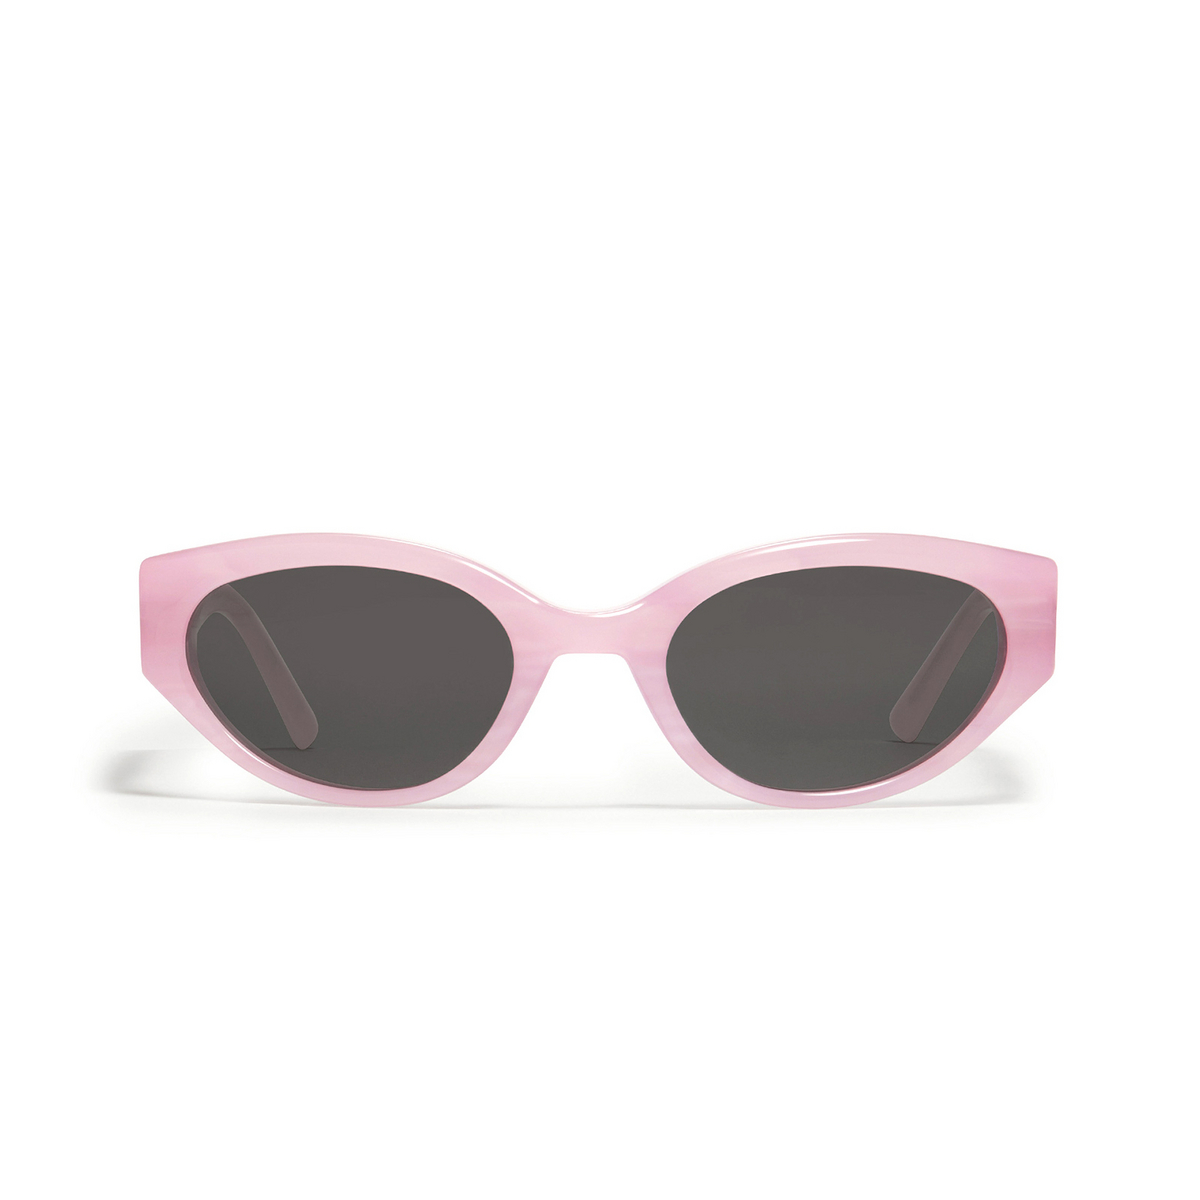 Gentle Monster® Cat-eye Sunglasses: Molto color P1 Pink - front view